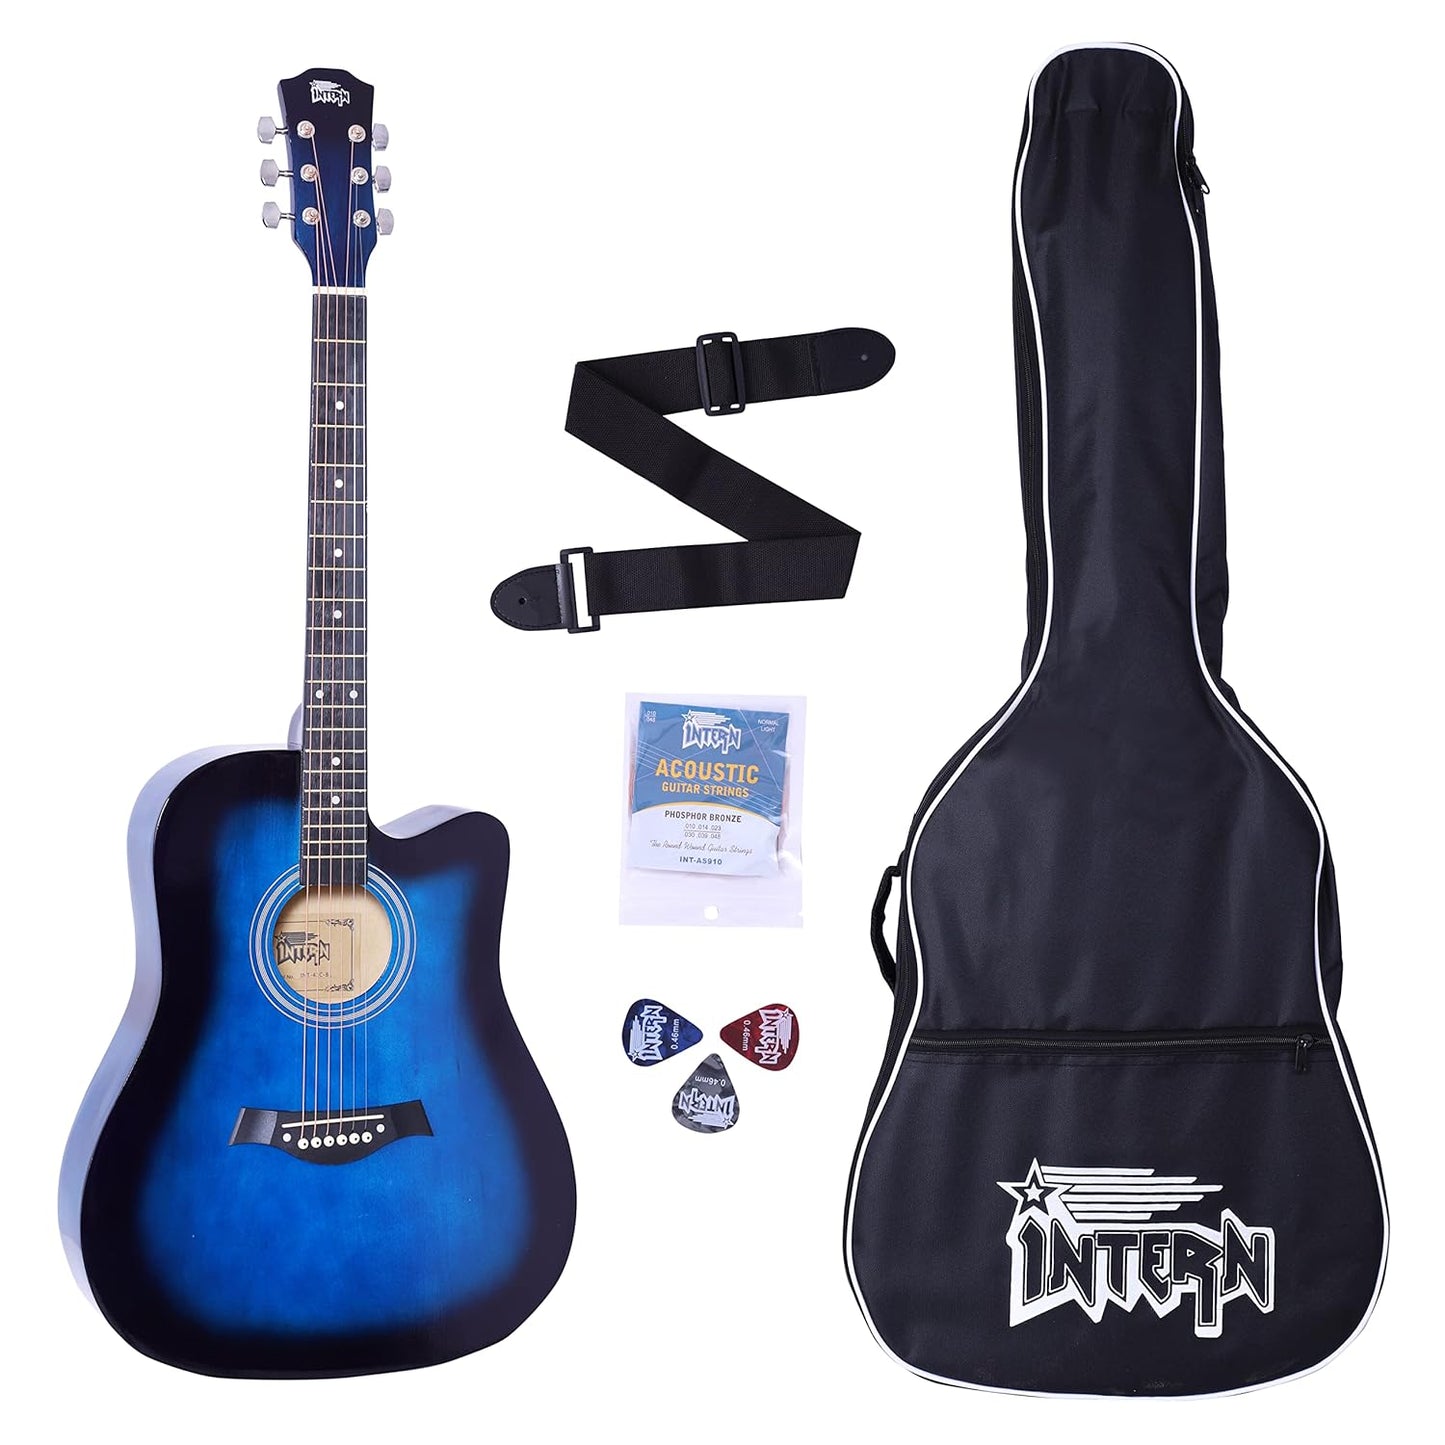 INTERN 41 inches Acoustic Guitar with truss rod. Includes carry bag, strings pack, strap & plectrums. Premium Wooden durable built, tonal stability & for all age-groups(Electric Blue).